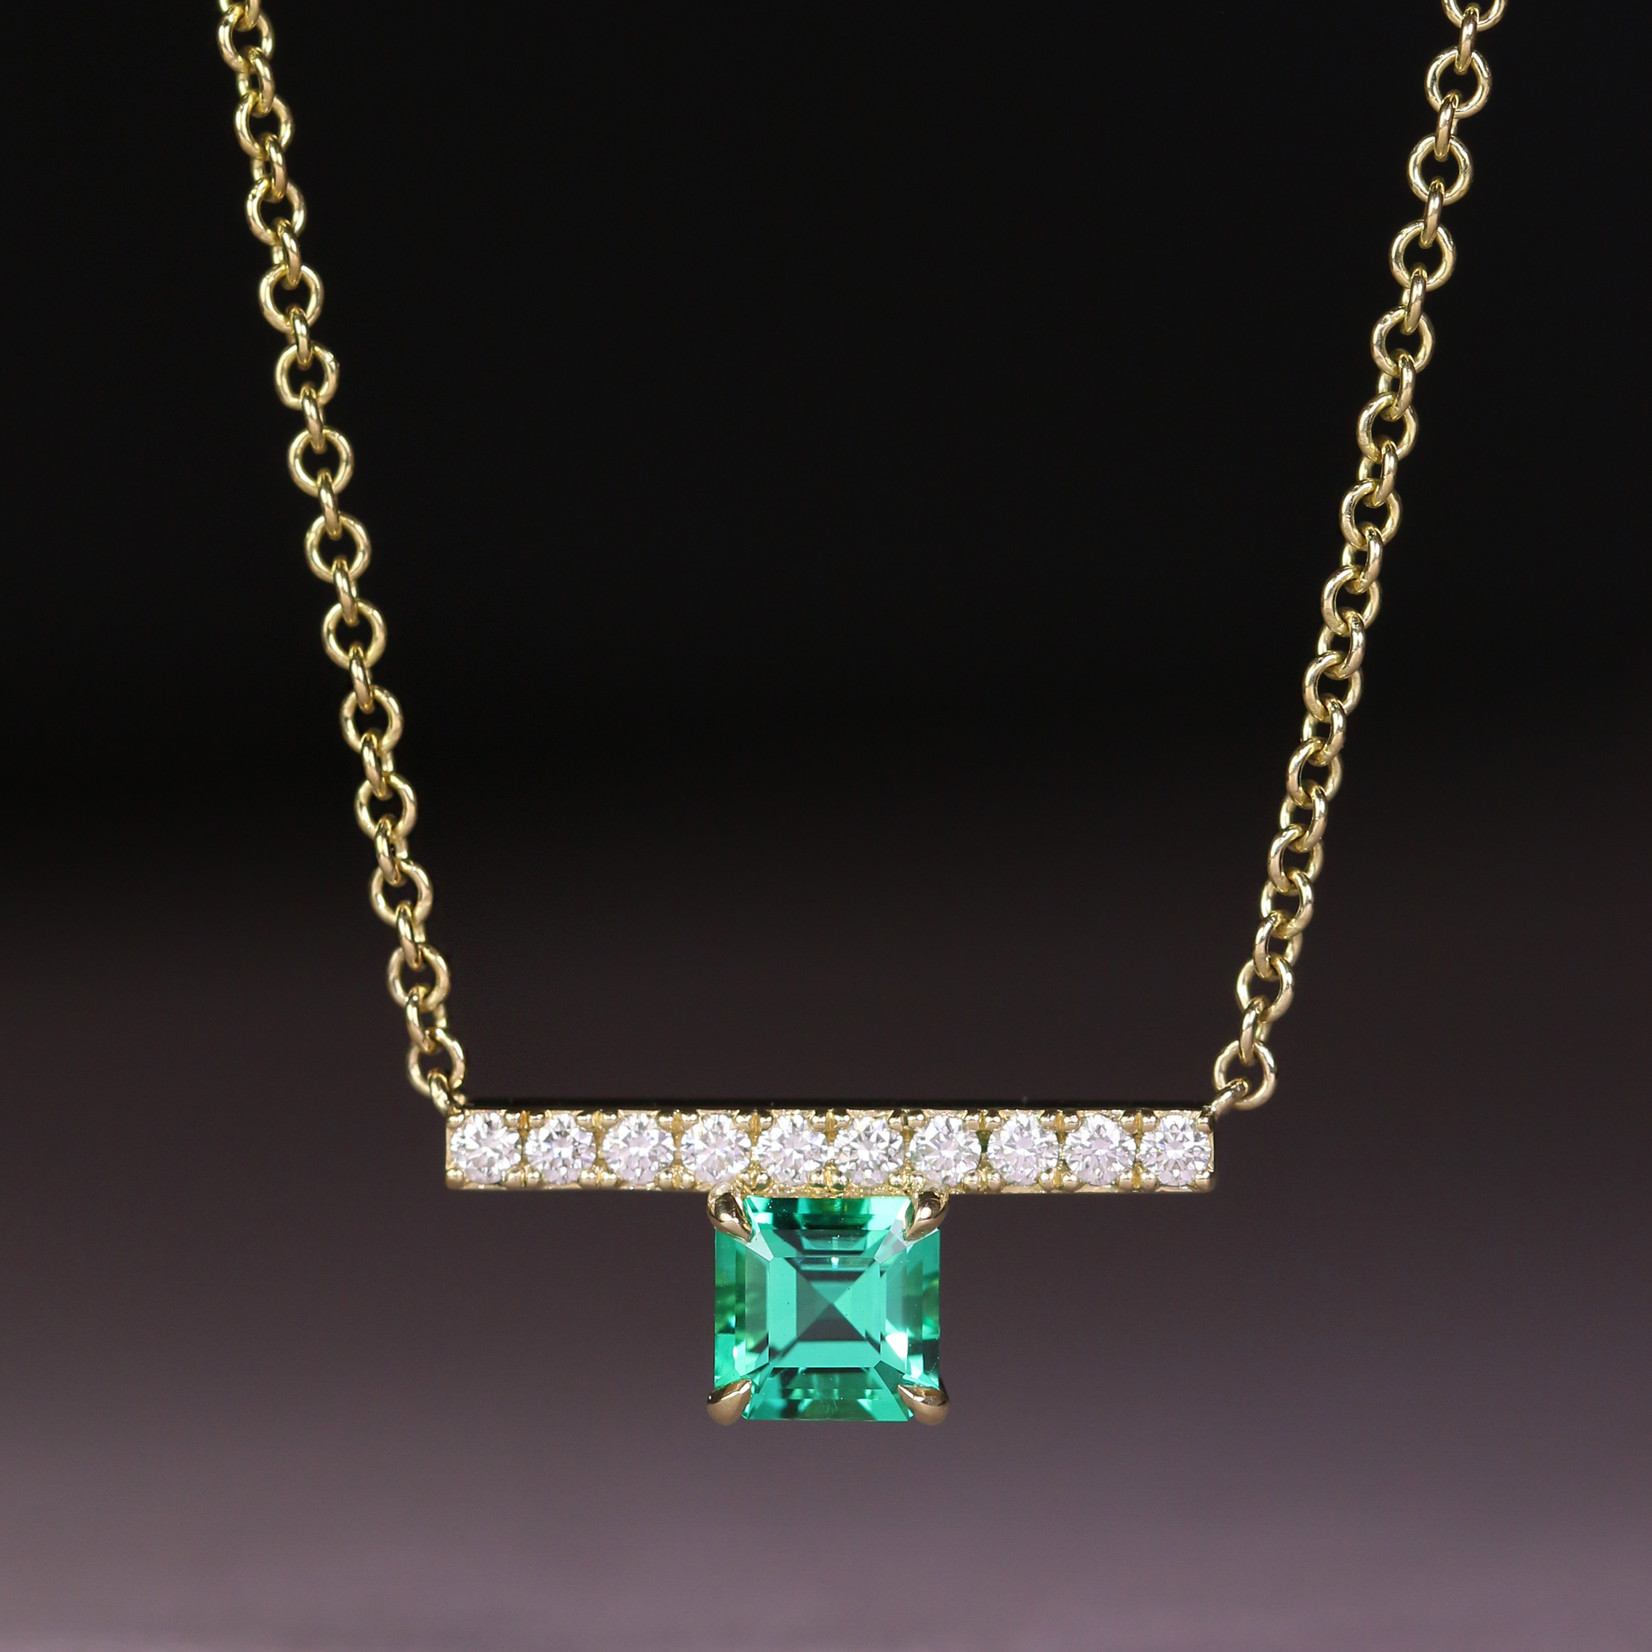 Baxter Moerman Cendra Necklace with Emerald